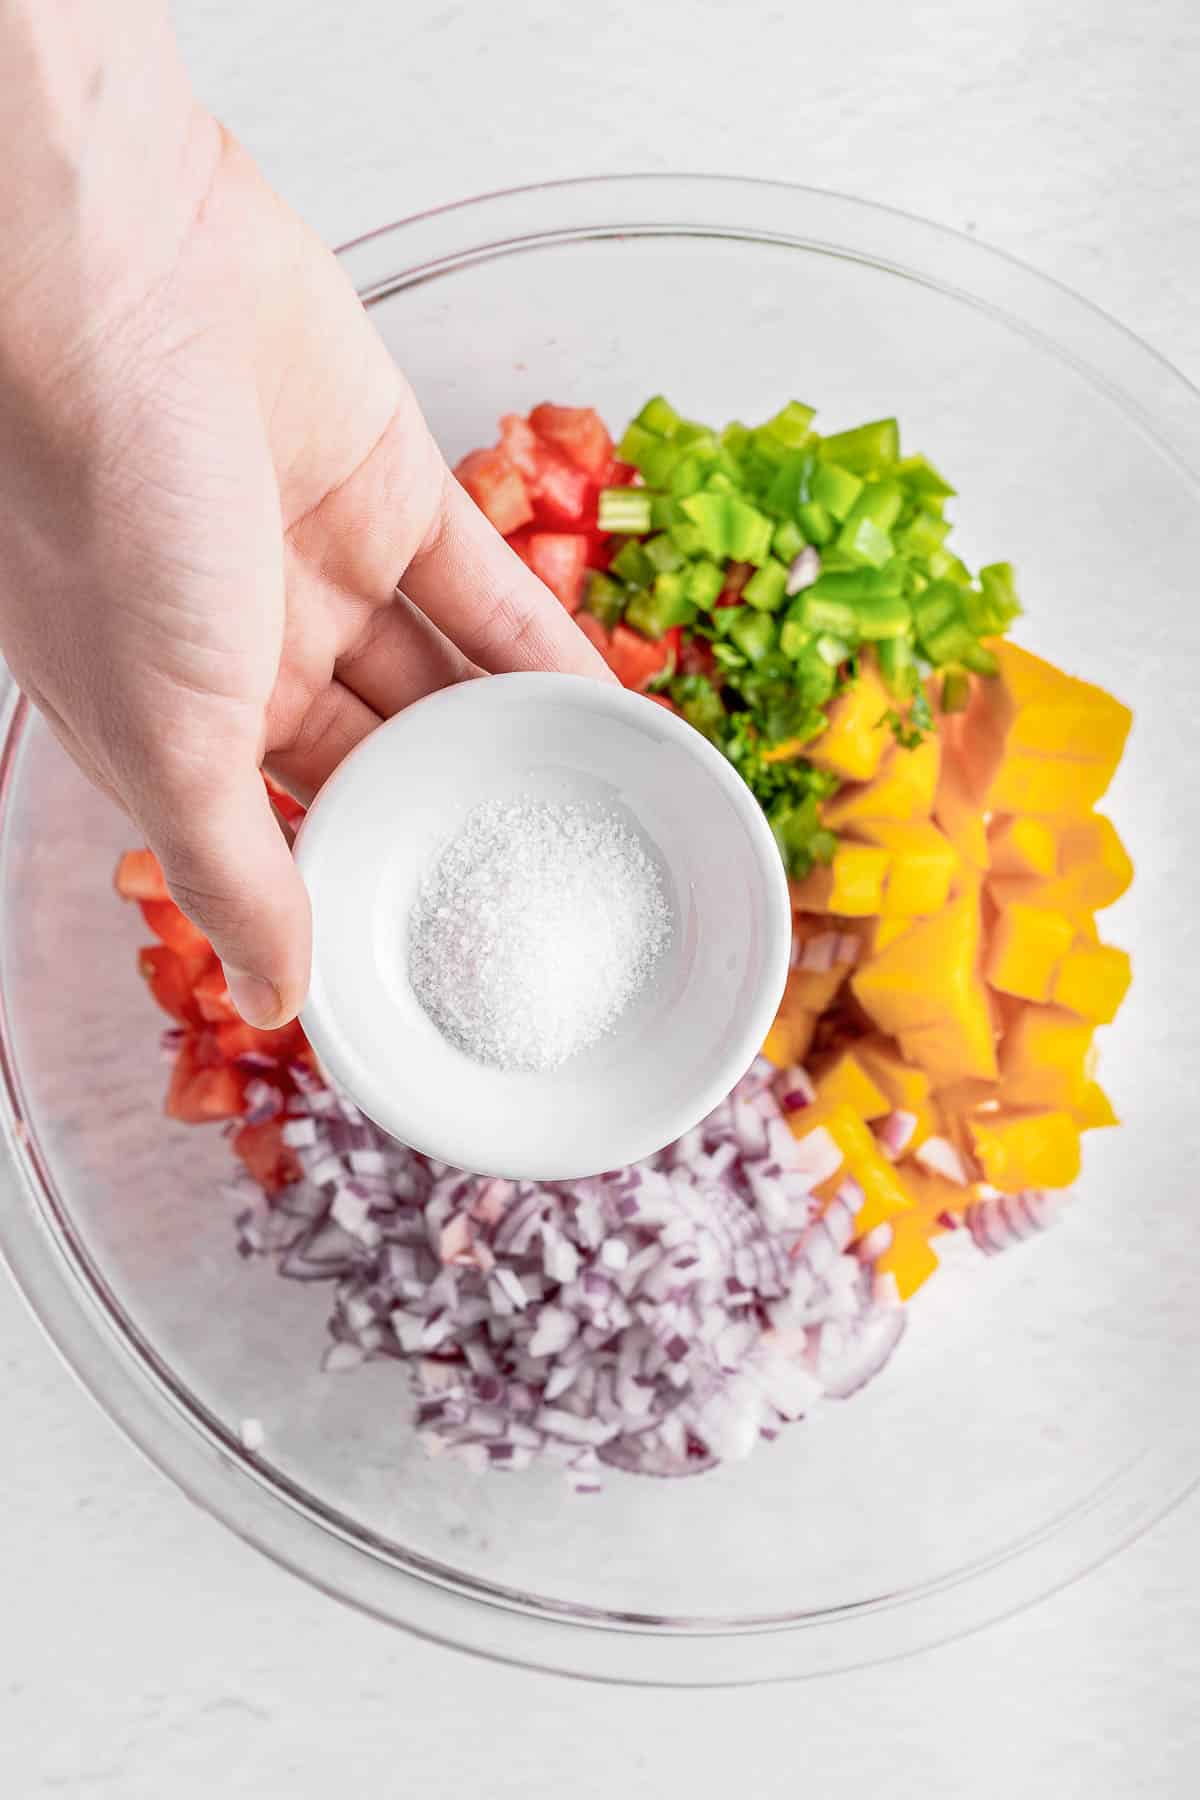 Small bowl of salt being held over large bowl of mango salsa ingredients.